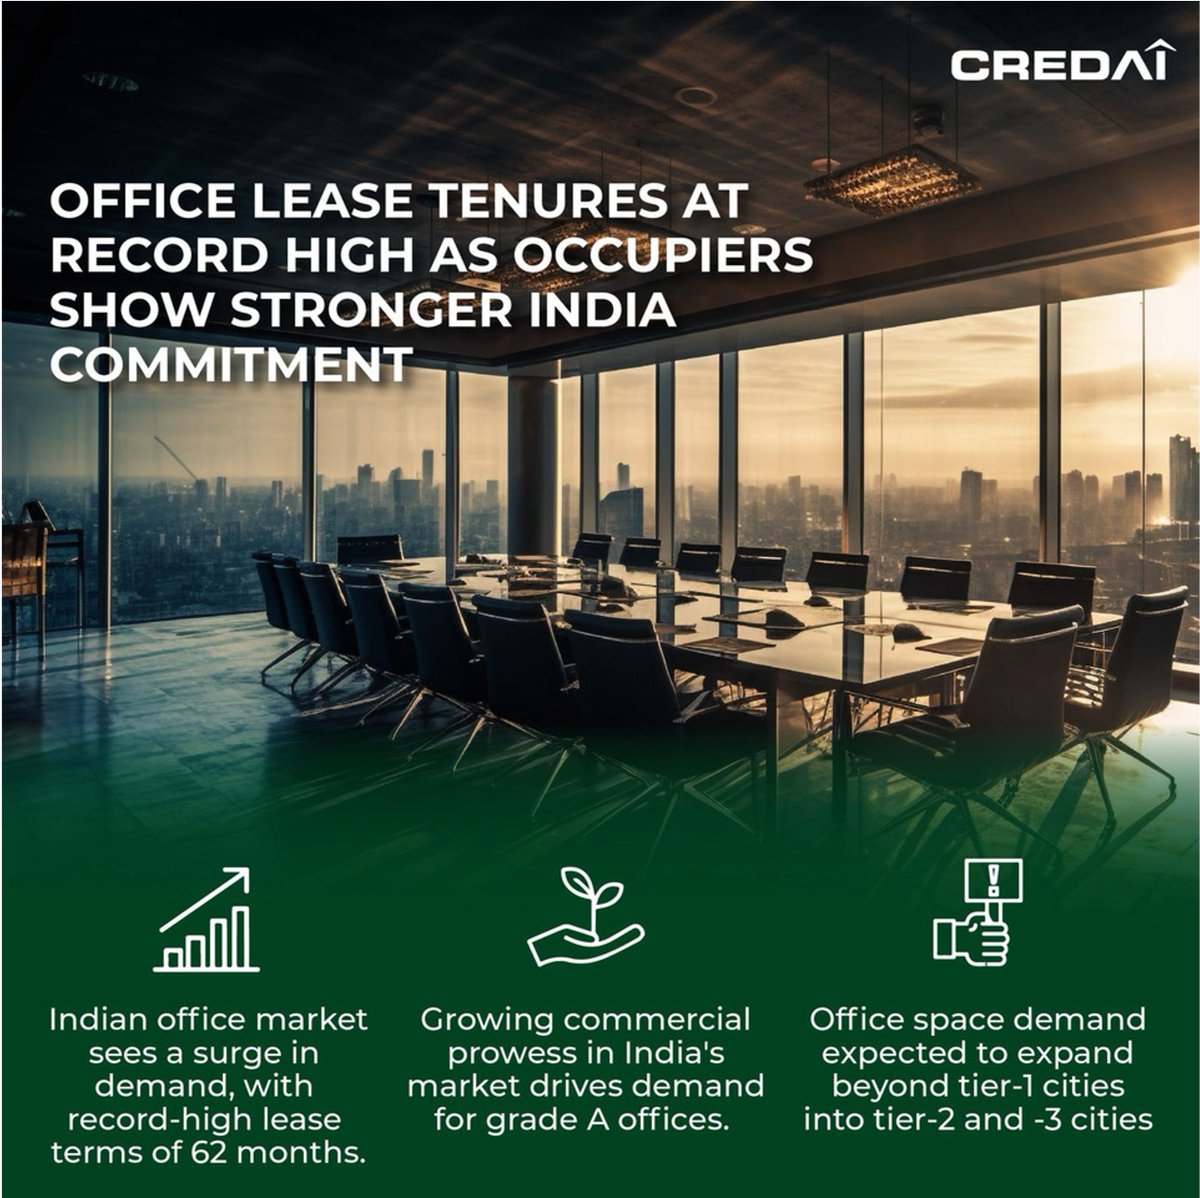 The demand for office spaces in key markets is soaring, with lease tenures and volumes hitting new benchmarks. #CREDAI #CREDAINational #OfficeSpaces #CommercialRealEstate #KeyMarkets #LeaseTenures #RealEstateTrends #OfficeDemand #MarketGrowth @MCHI_President @CREDAINational